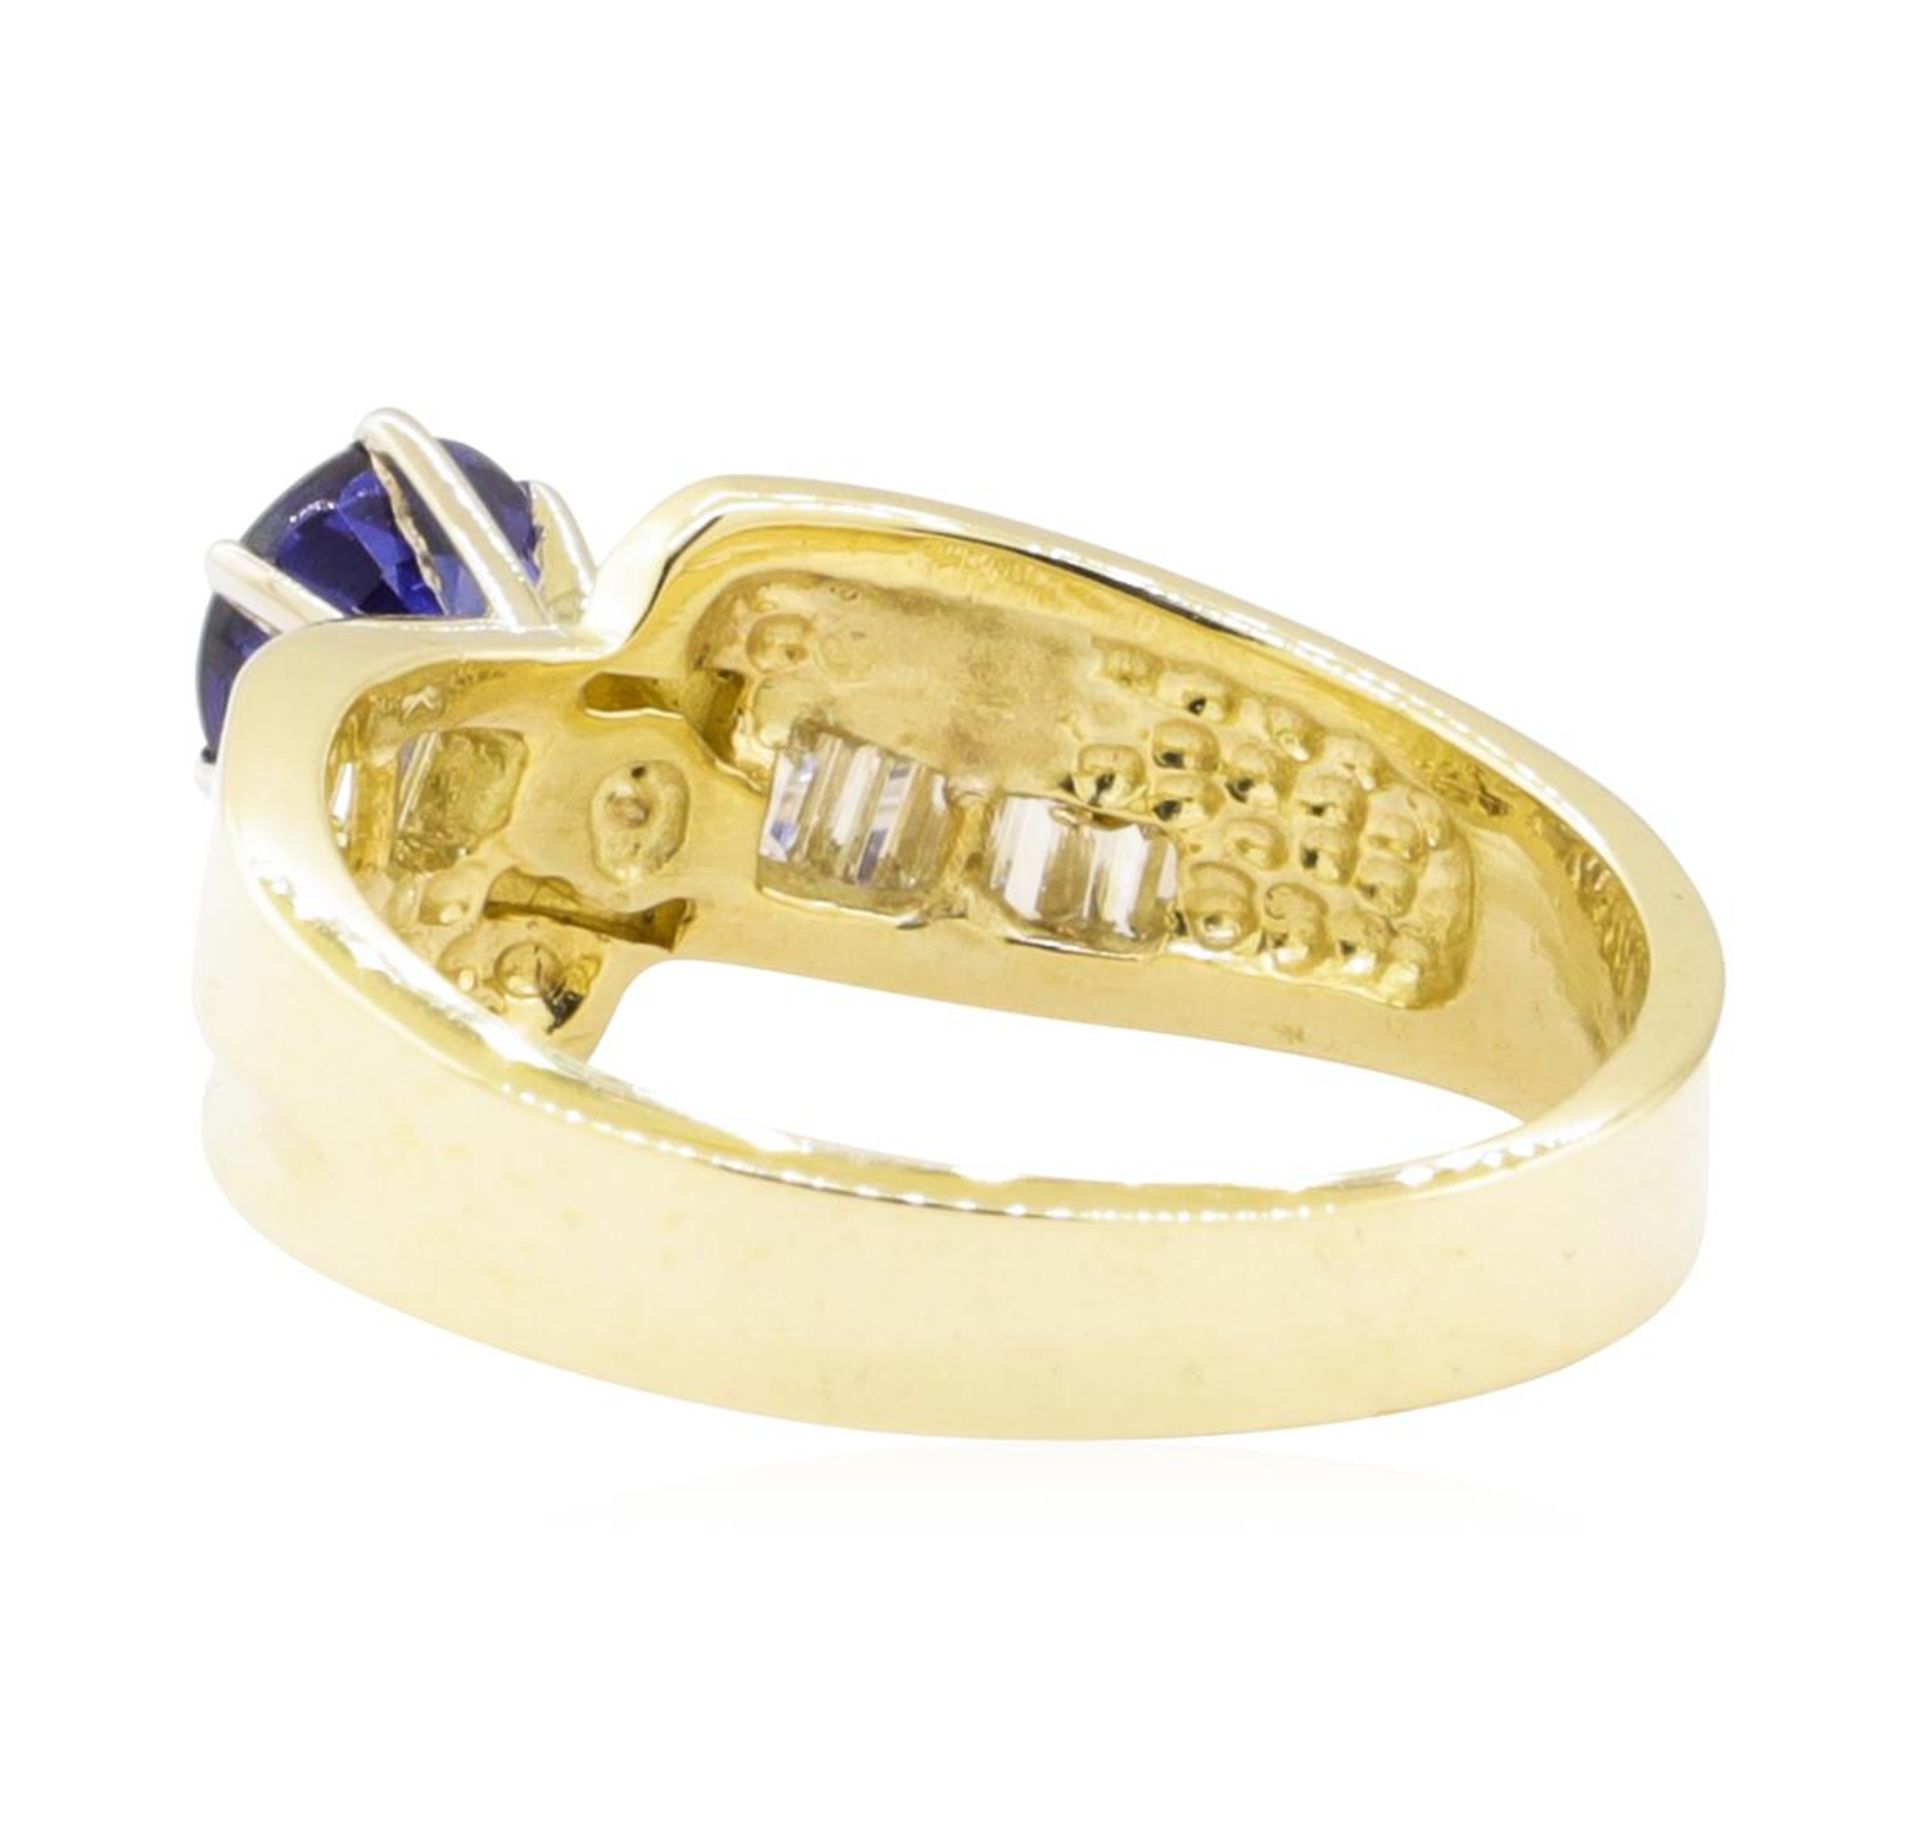 1.32ctw Blue Sapphire and Diamond Ring - 14KT Yellow Gold - Image 3 of 4